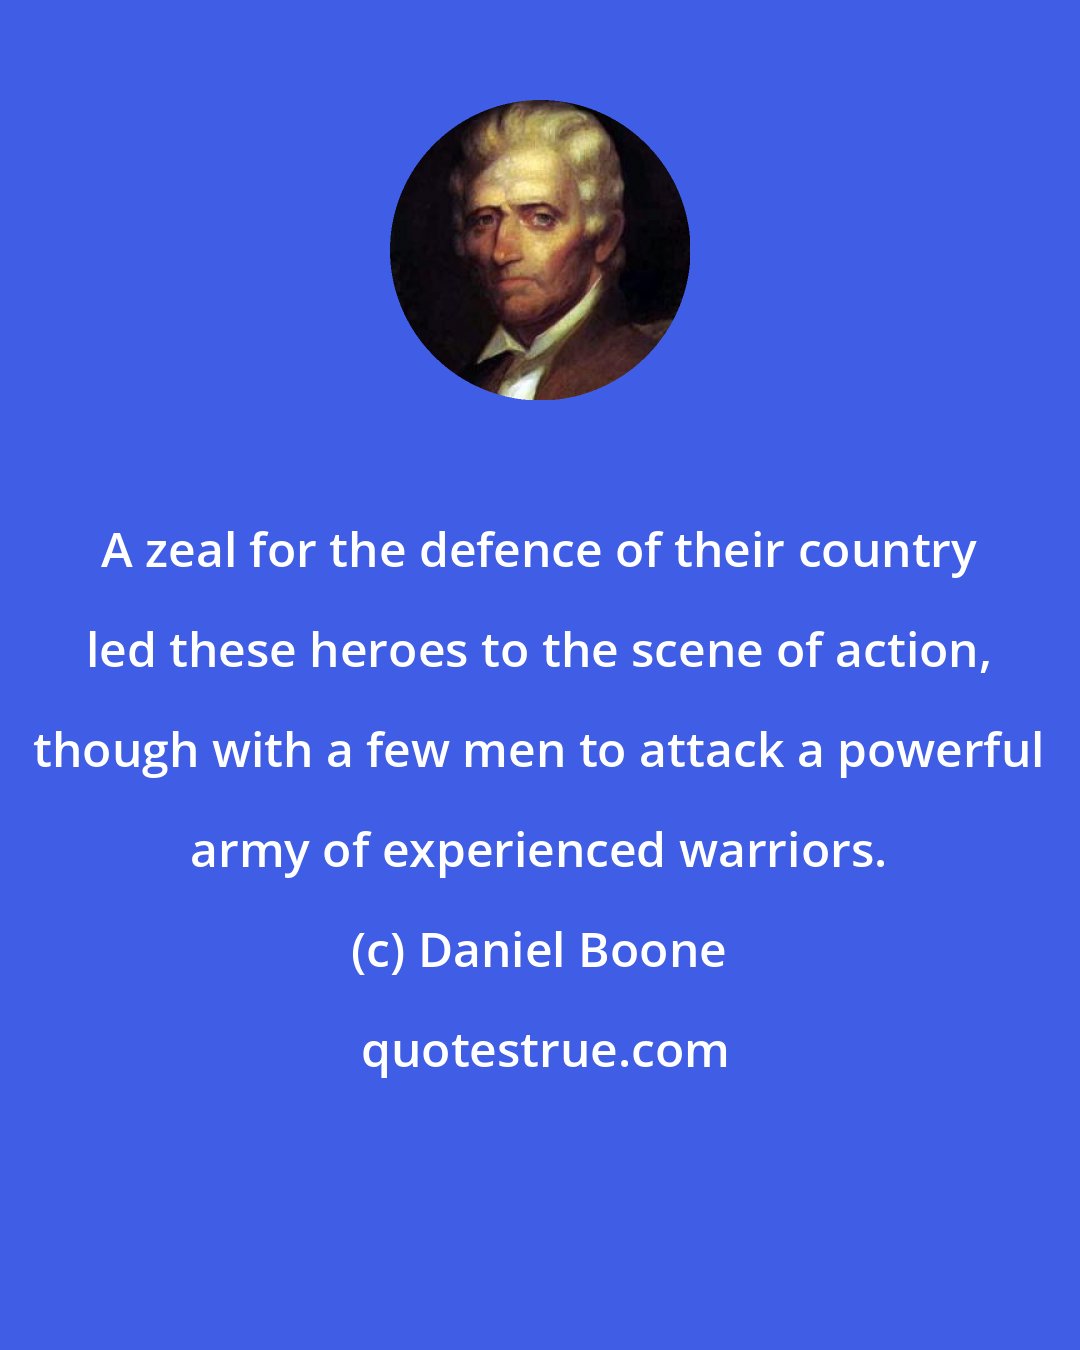 Daniel Boone: A zeal for the defence of their country led these heroes to the scene of action, though with a few men to attack a powerful army of experienced warriors.